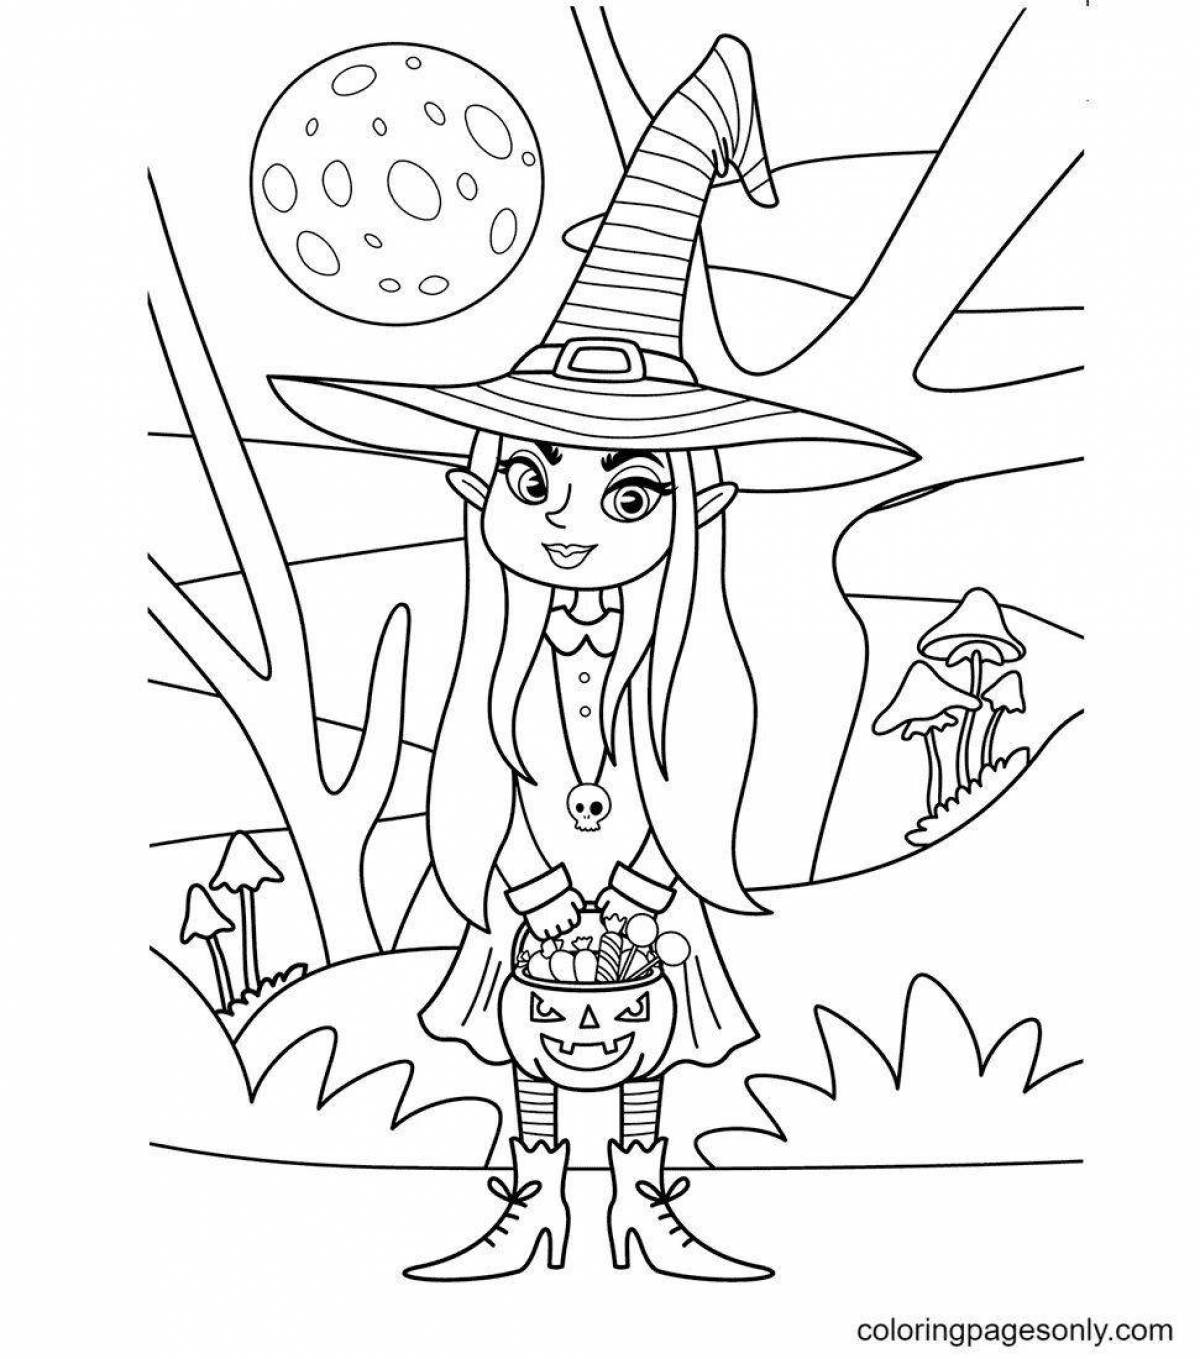 Amazing aya and witch coloring page